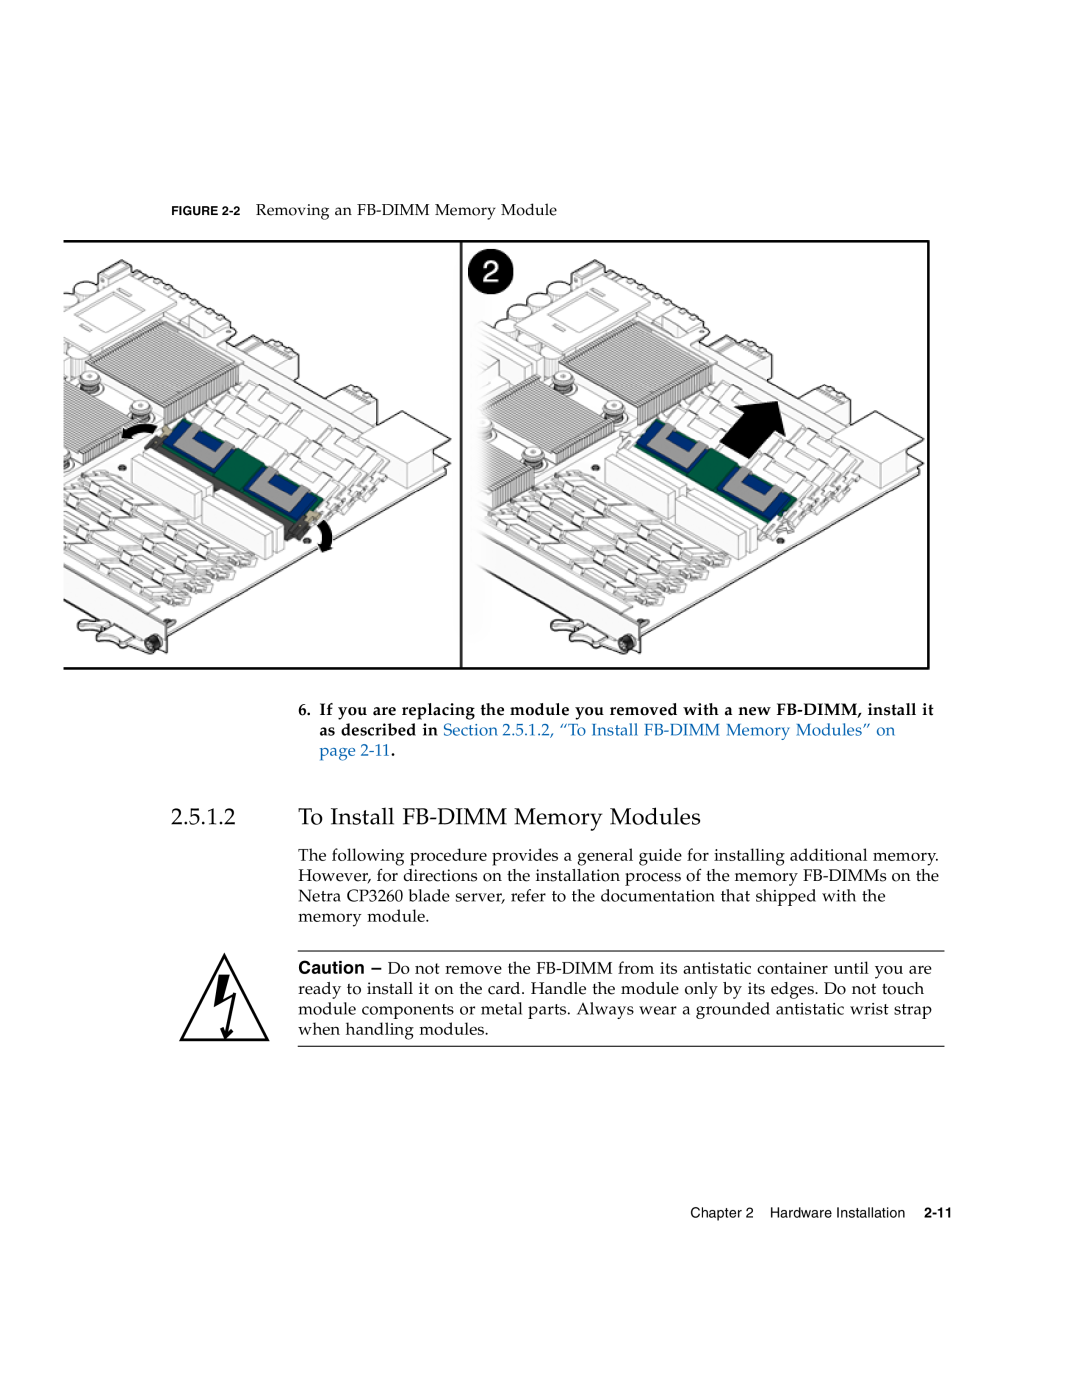 Sun Microsystems CP3260 manual To Install FB-DIMM Memory Modules, 2 Removing an FB-DIMM Memory Module 